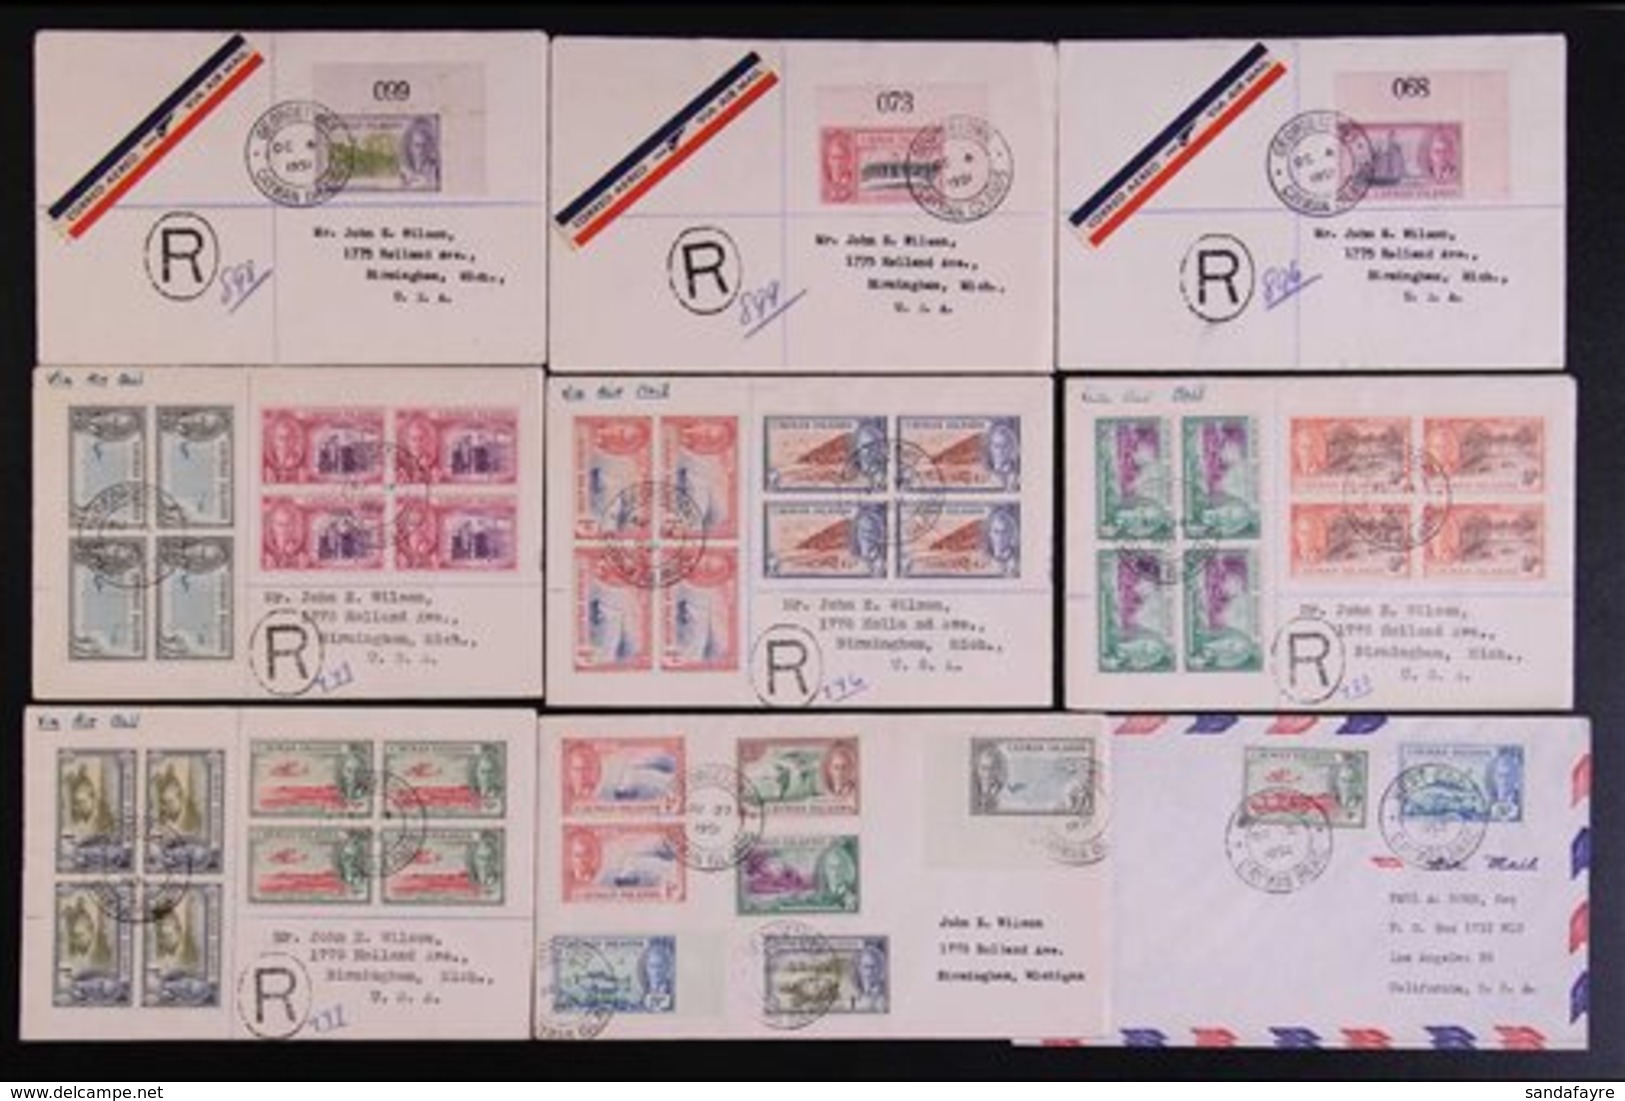 \Y 1950 - 1951 GEO VI COVERS\Y Attractive Group Of Covers, Some Registered, Bearing A Range Of 1950 Commemorative Issues - Iles Caïmans